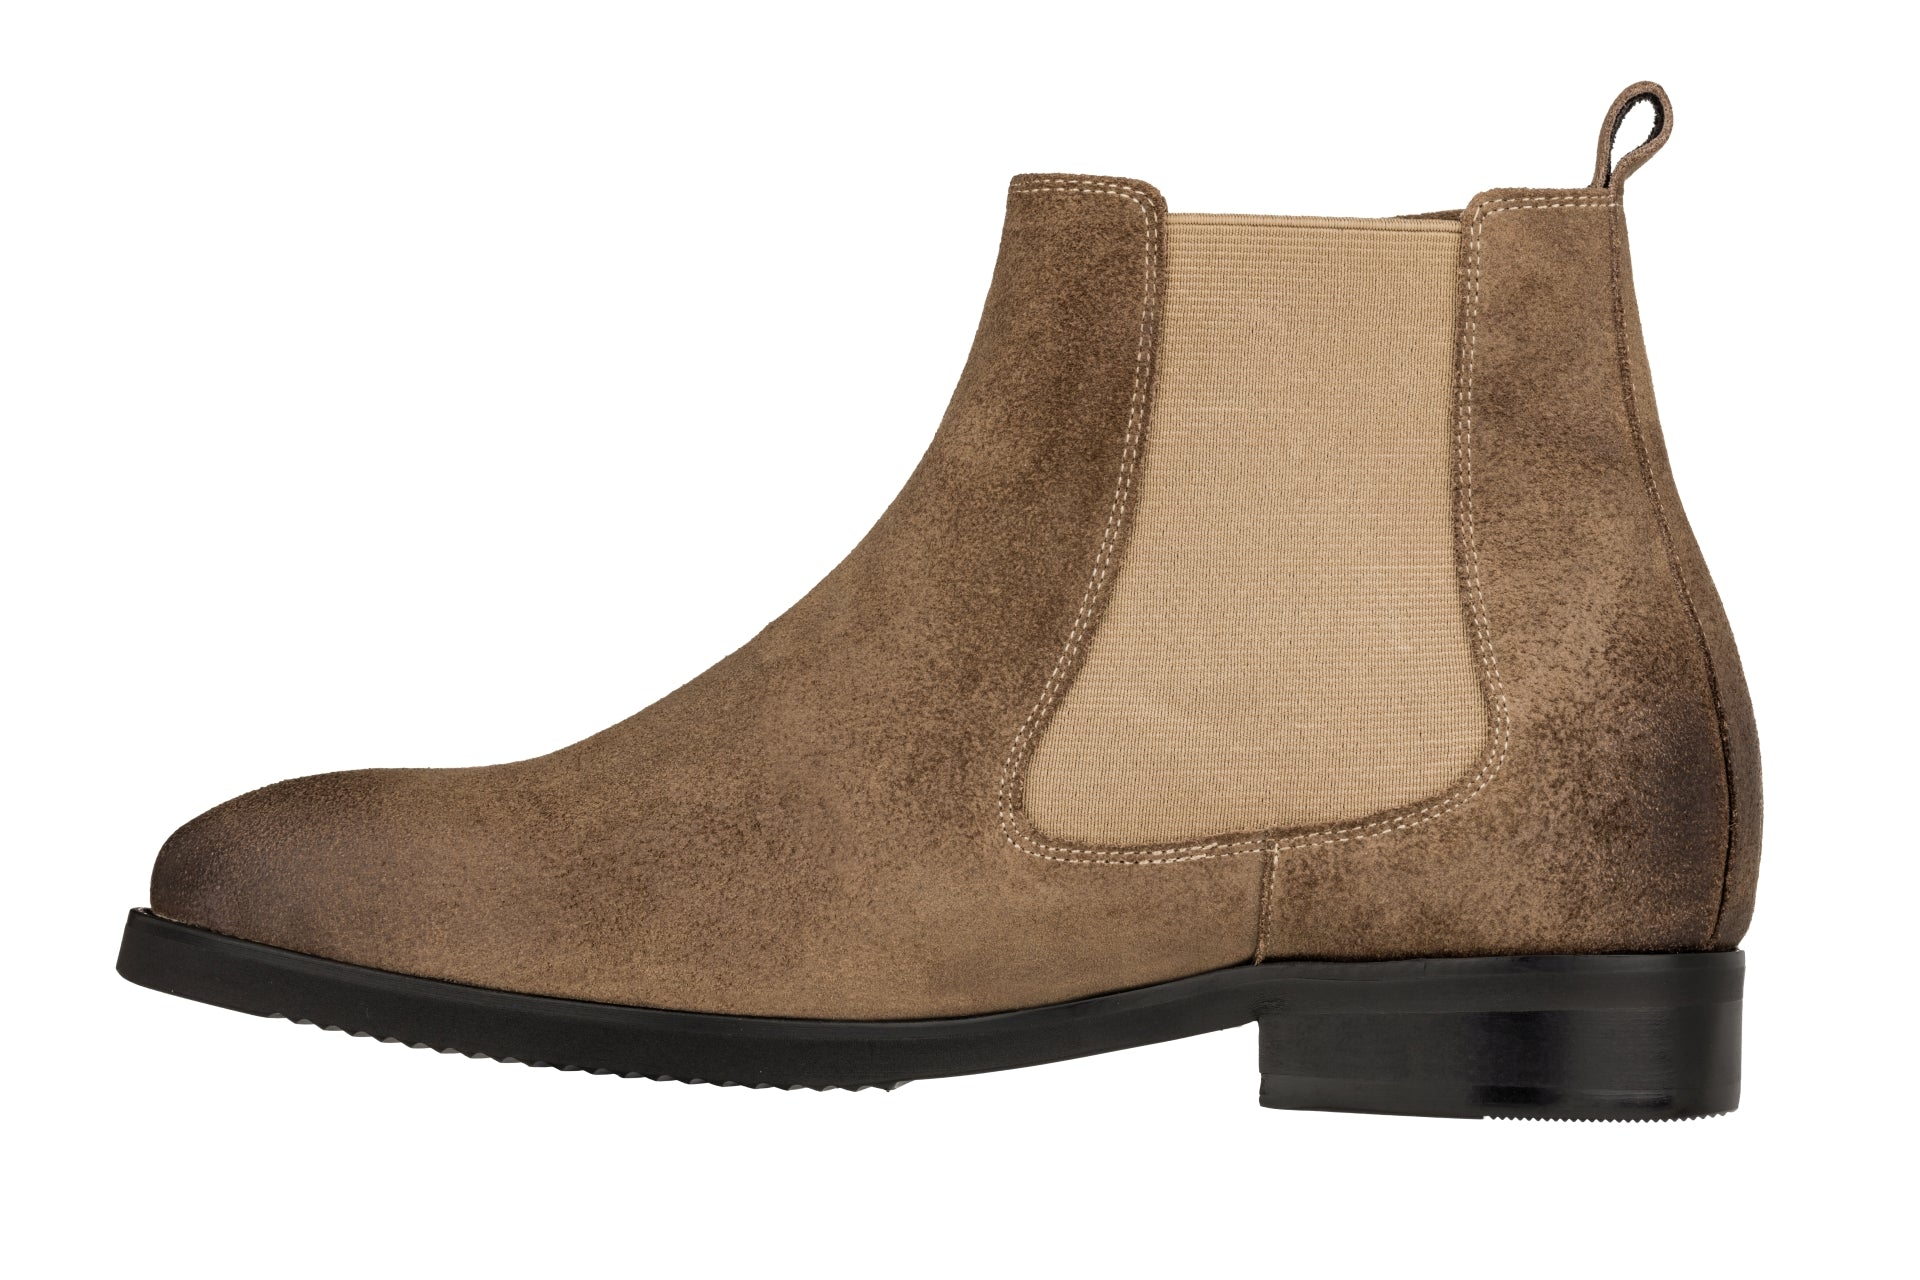 Elevator shoes height increase TOTO - K92083 - 3.0 Inches Taller (Nubuck Coffee Brown) - Chelsea Ankle Boots